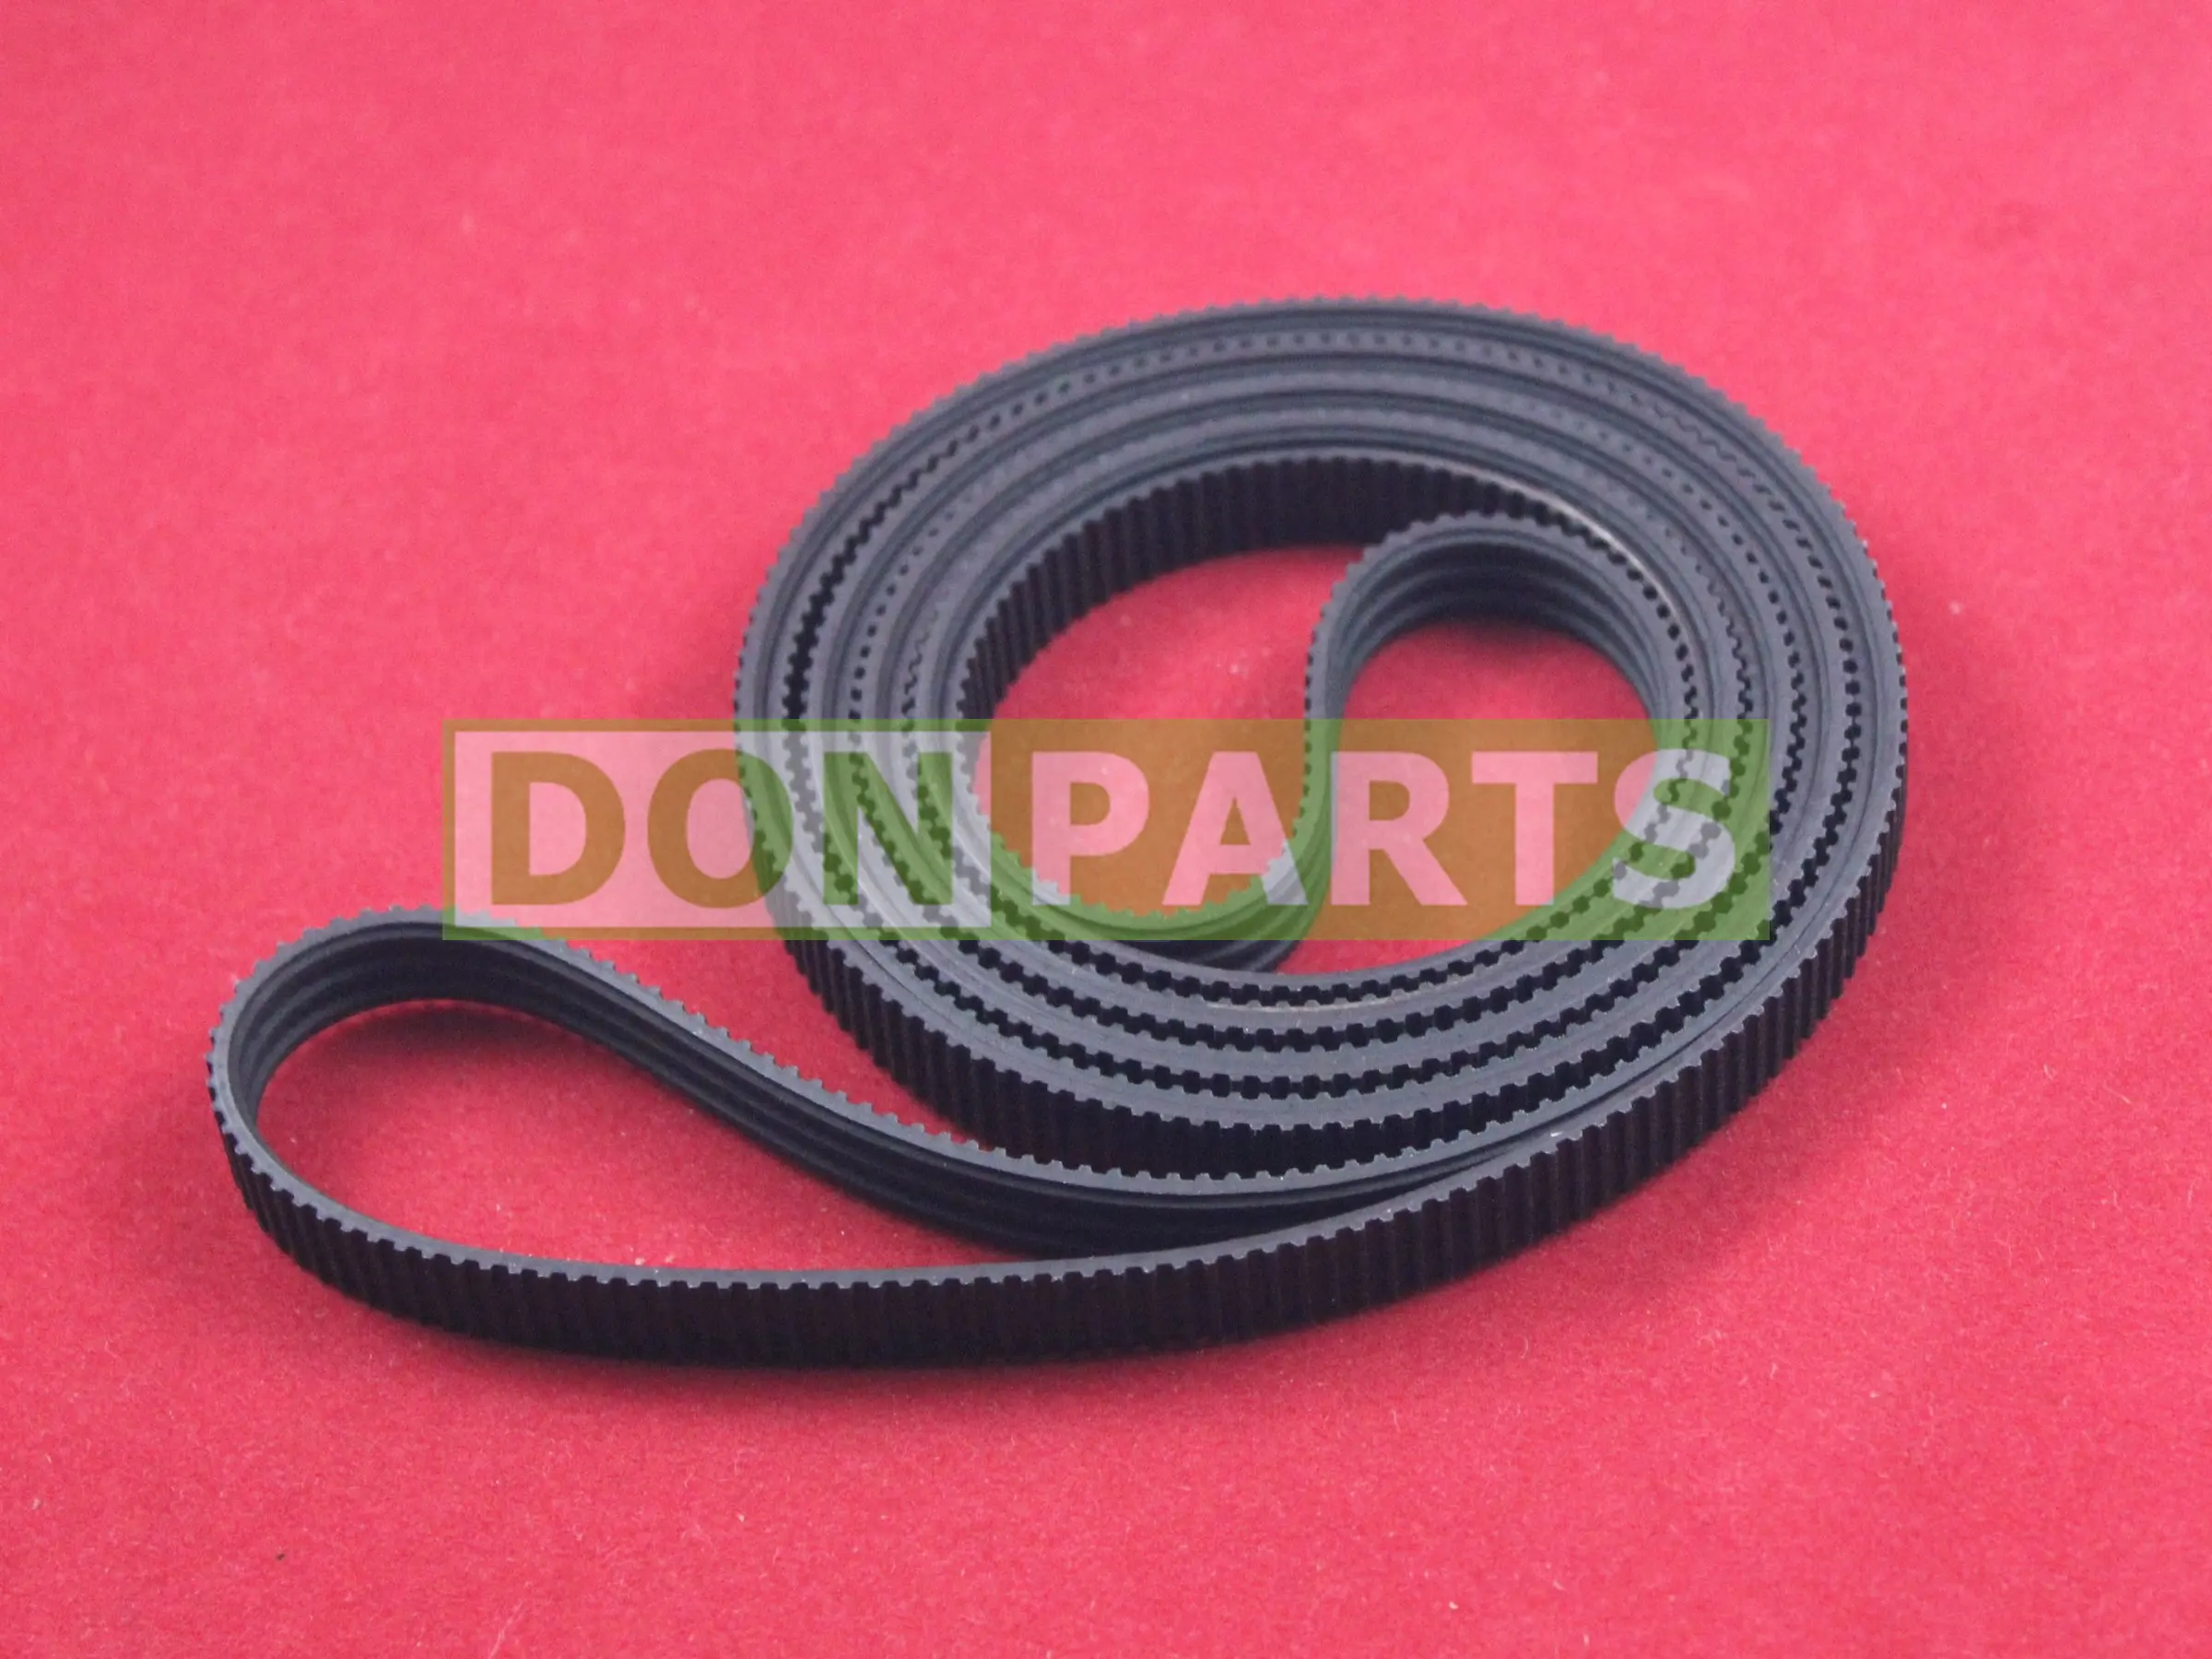 

New 1pc Carriage Drive Belt For HP DesignJet 230 250 330 350 430 450 488 700 750 A1 Model C4705-60082 Printer Part